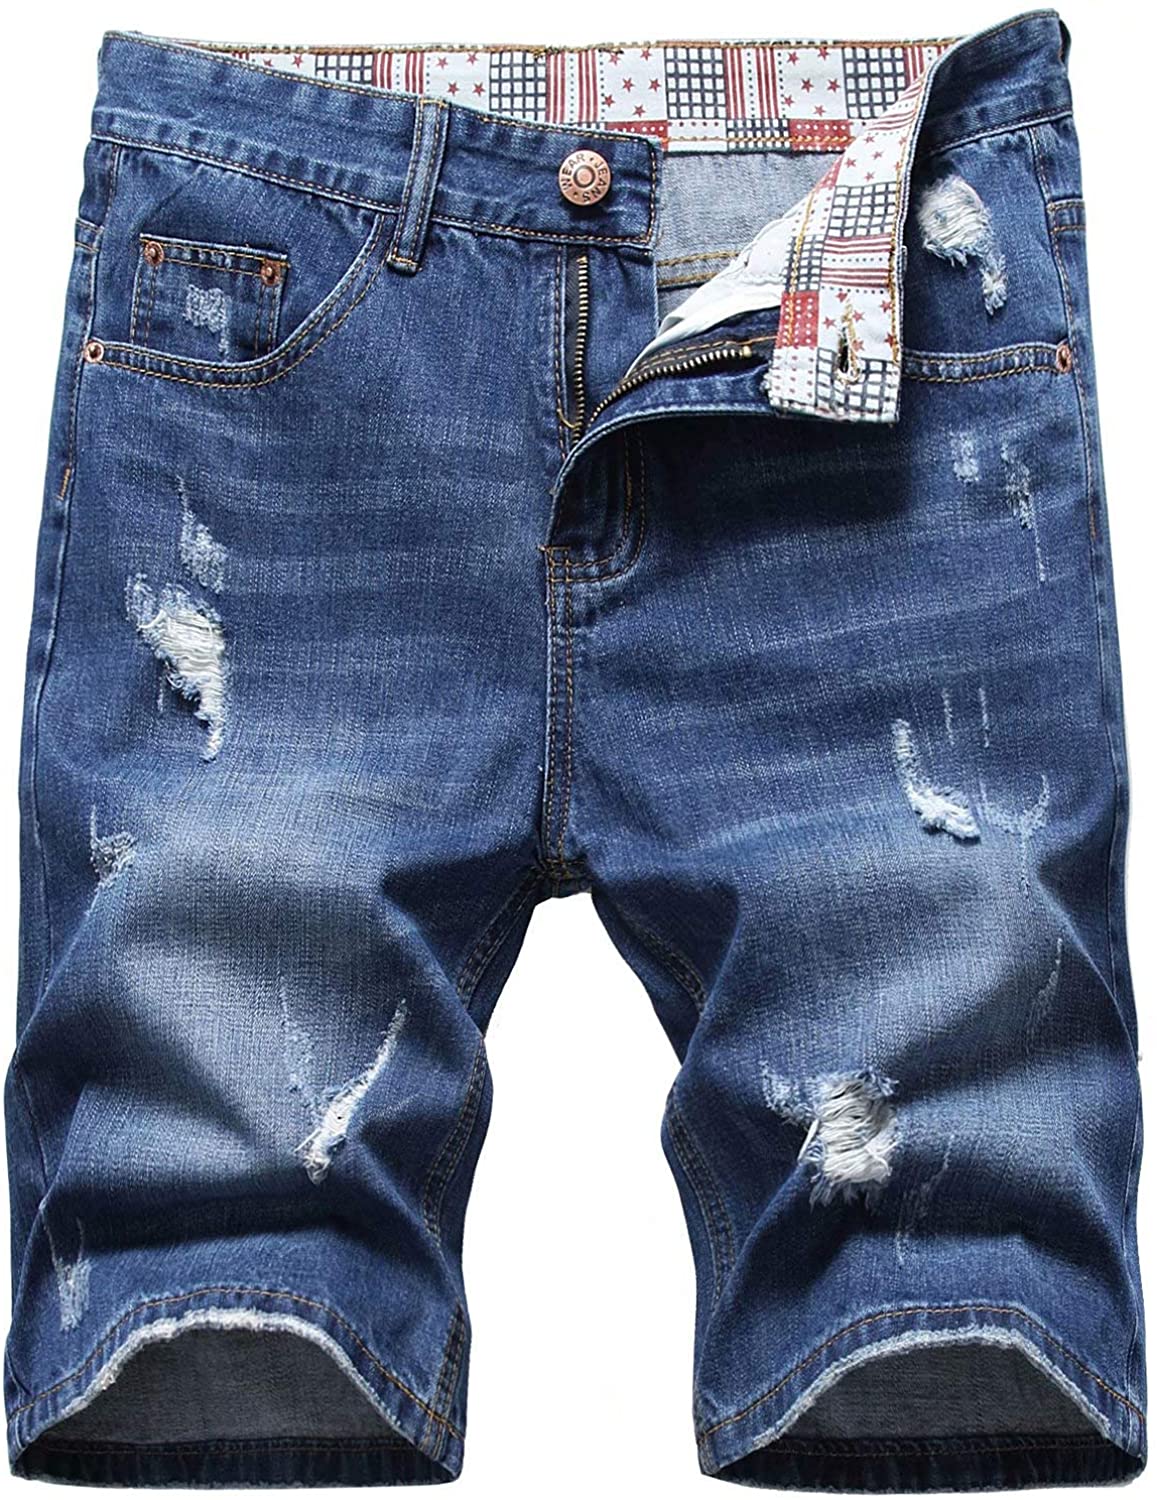 HENGAO Mens Vintage Ripped Holes Mid Rise Washed Jeans Slim Shorts